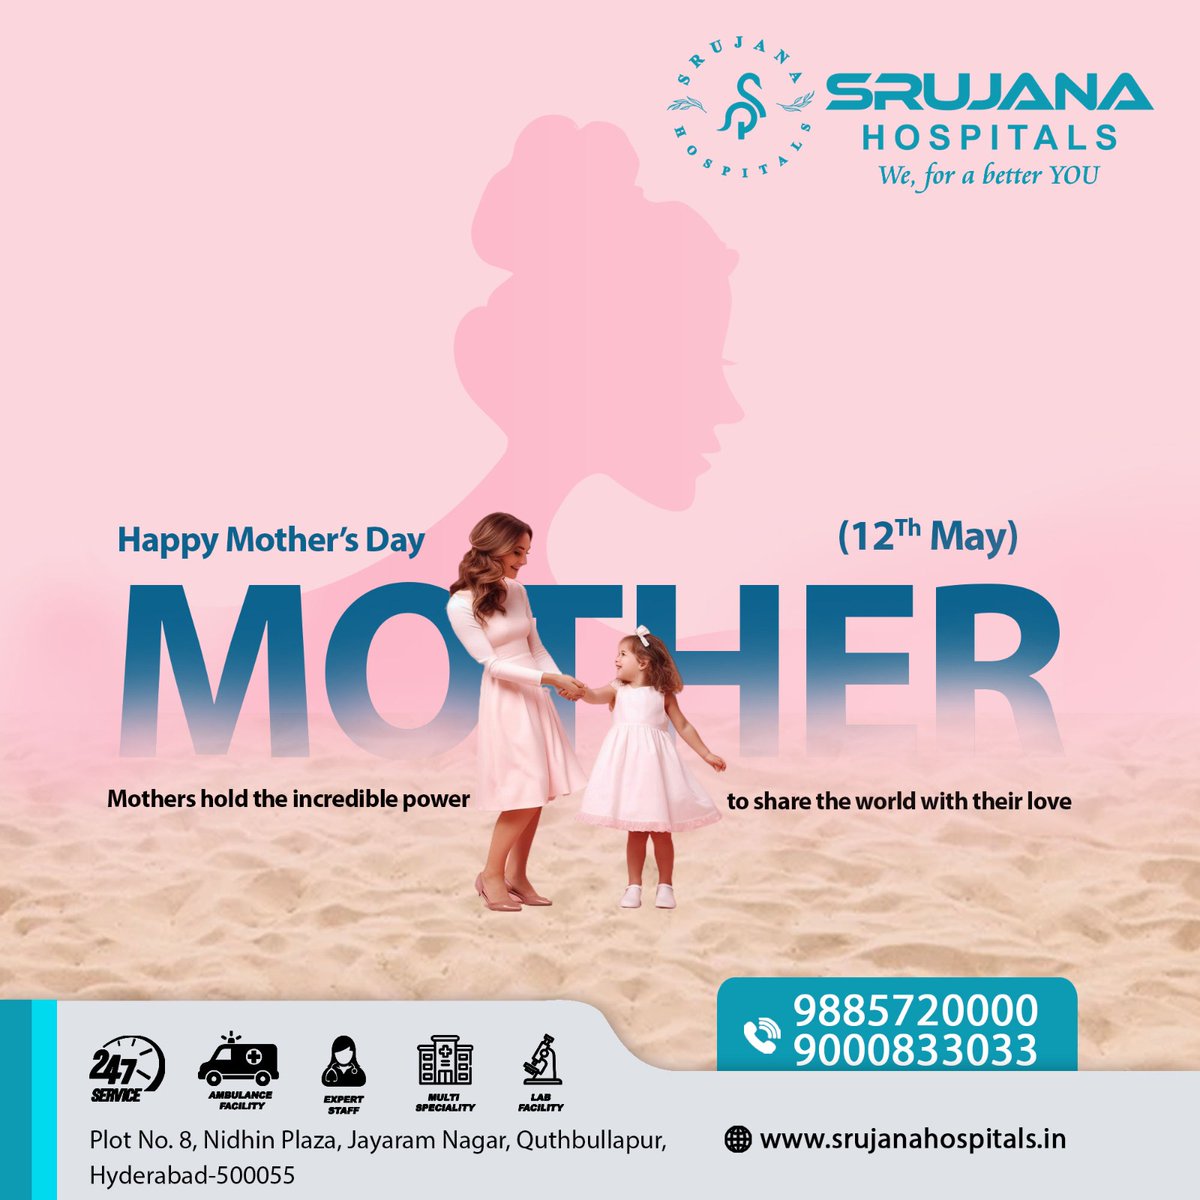 Behind every successful child is a loving and supportive mother. Happy Mother's Day to all the incredible moms out there!

#HappyMothersDay #MothersDay2024 #MomLife #LoveYouMom #Motherhood #BestMomEver #MomGoals #ThankYouMom #MothersDayGifts #Srujanahospitals